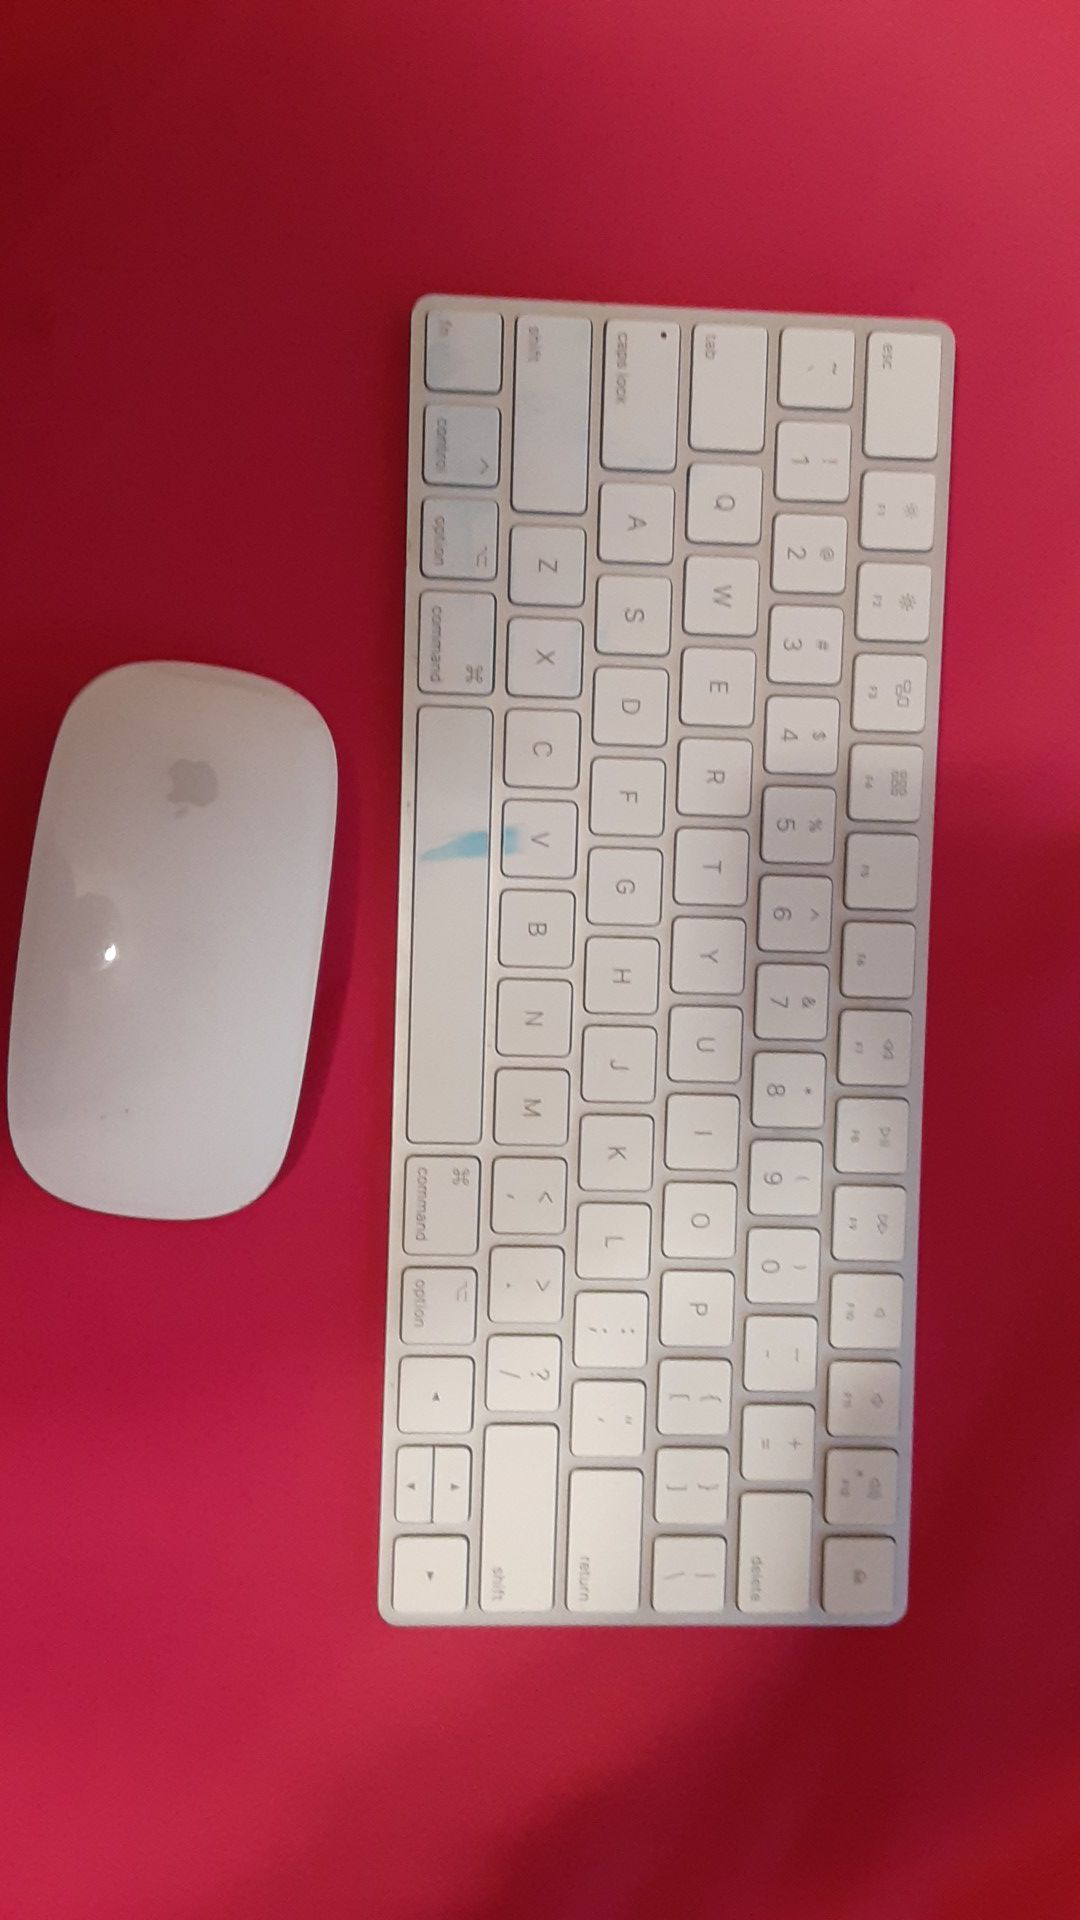 Magic mouse and keyboard